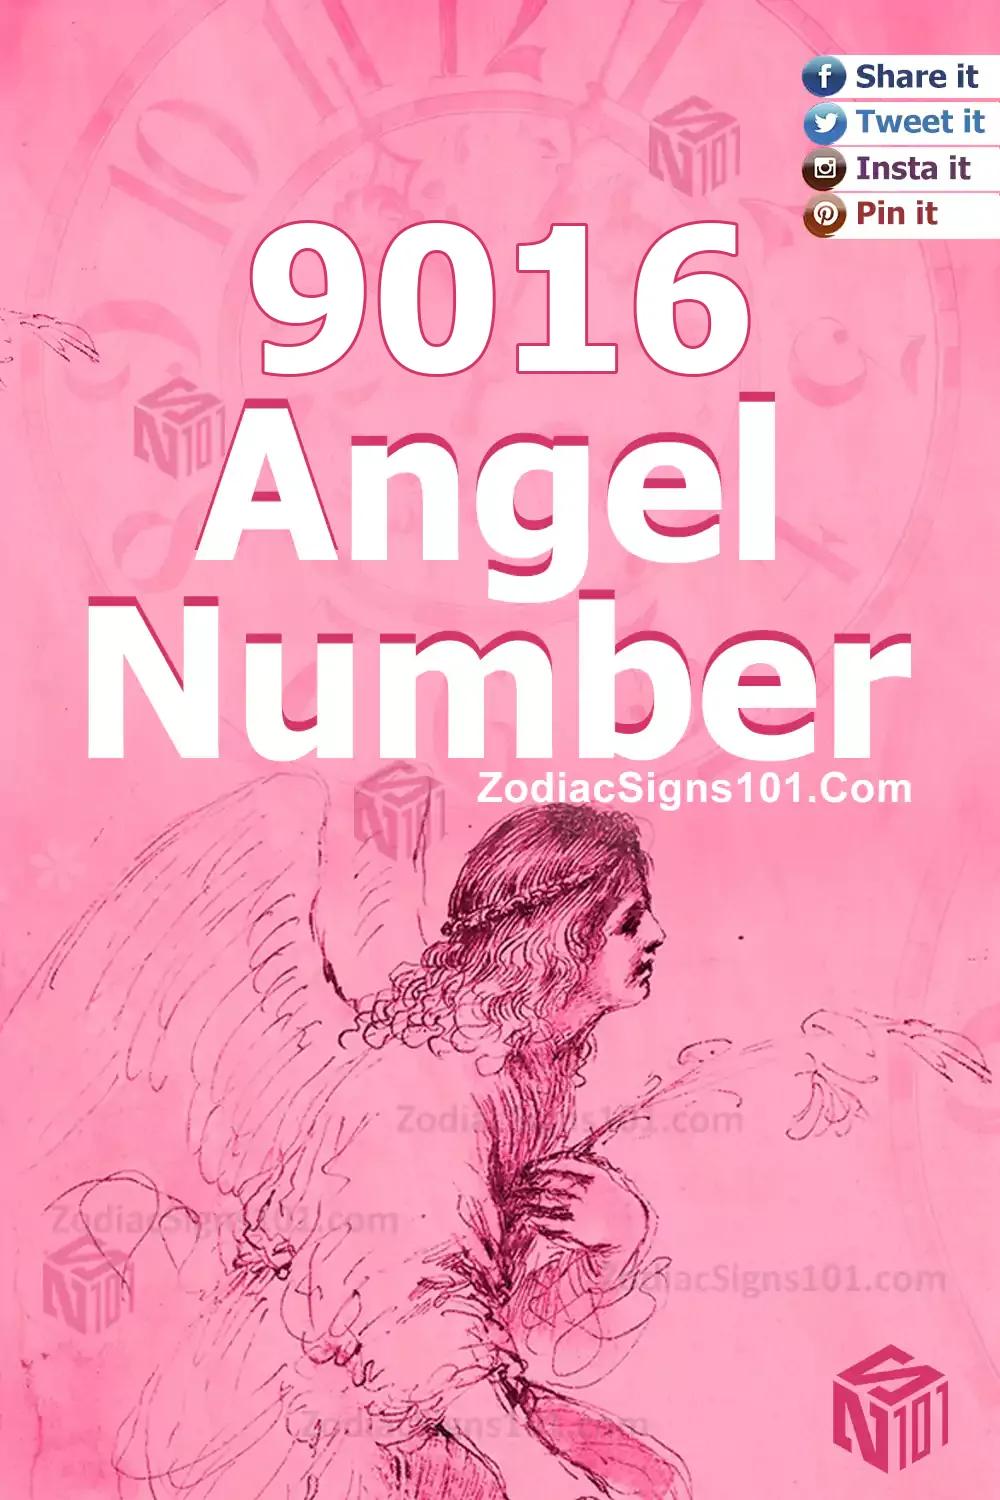 9016 Angel Number Meaning